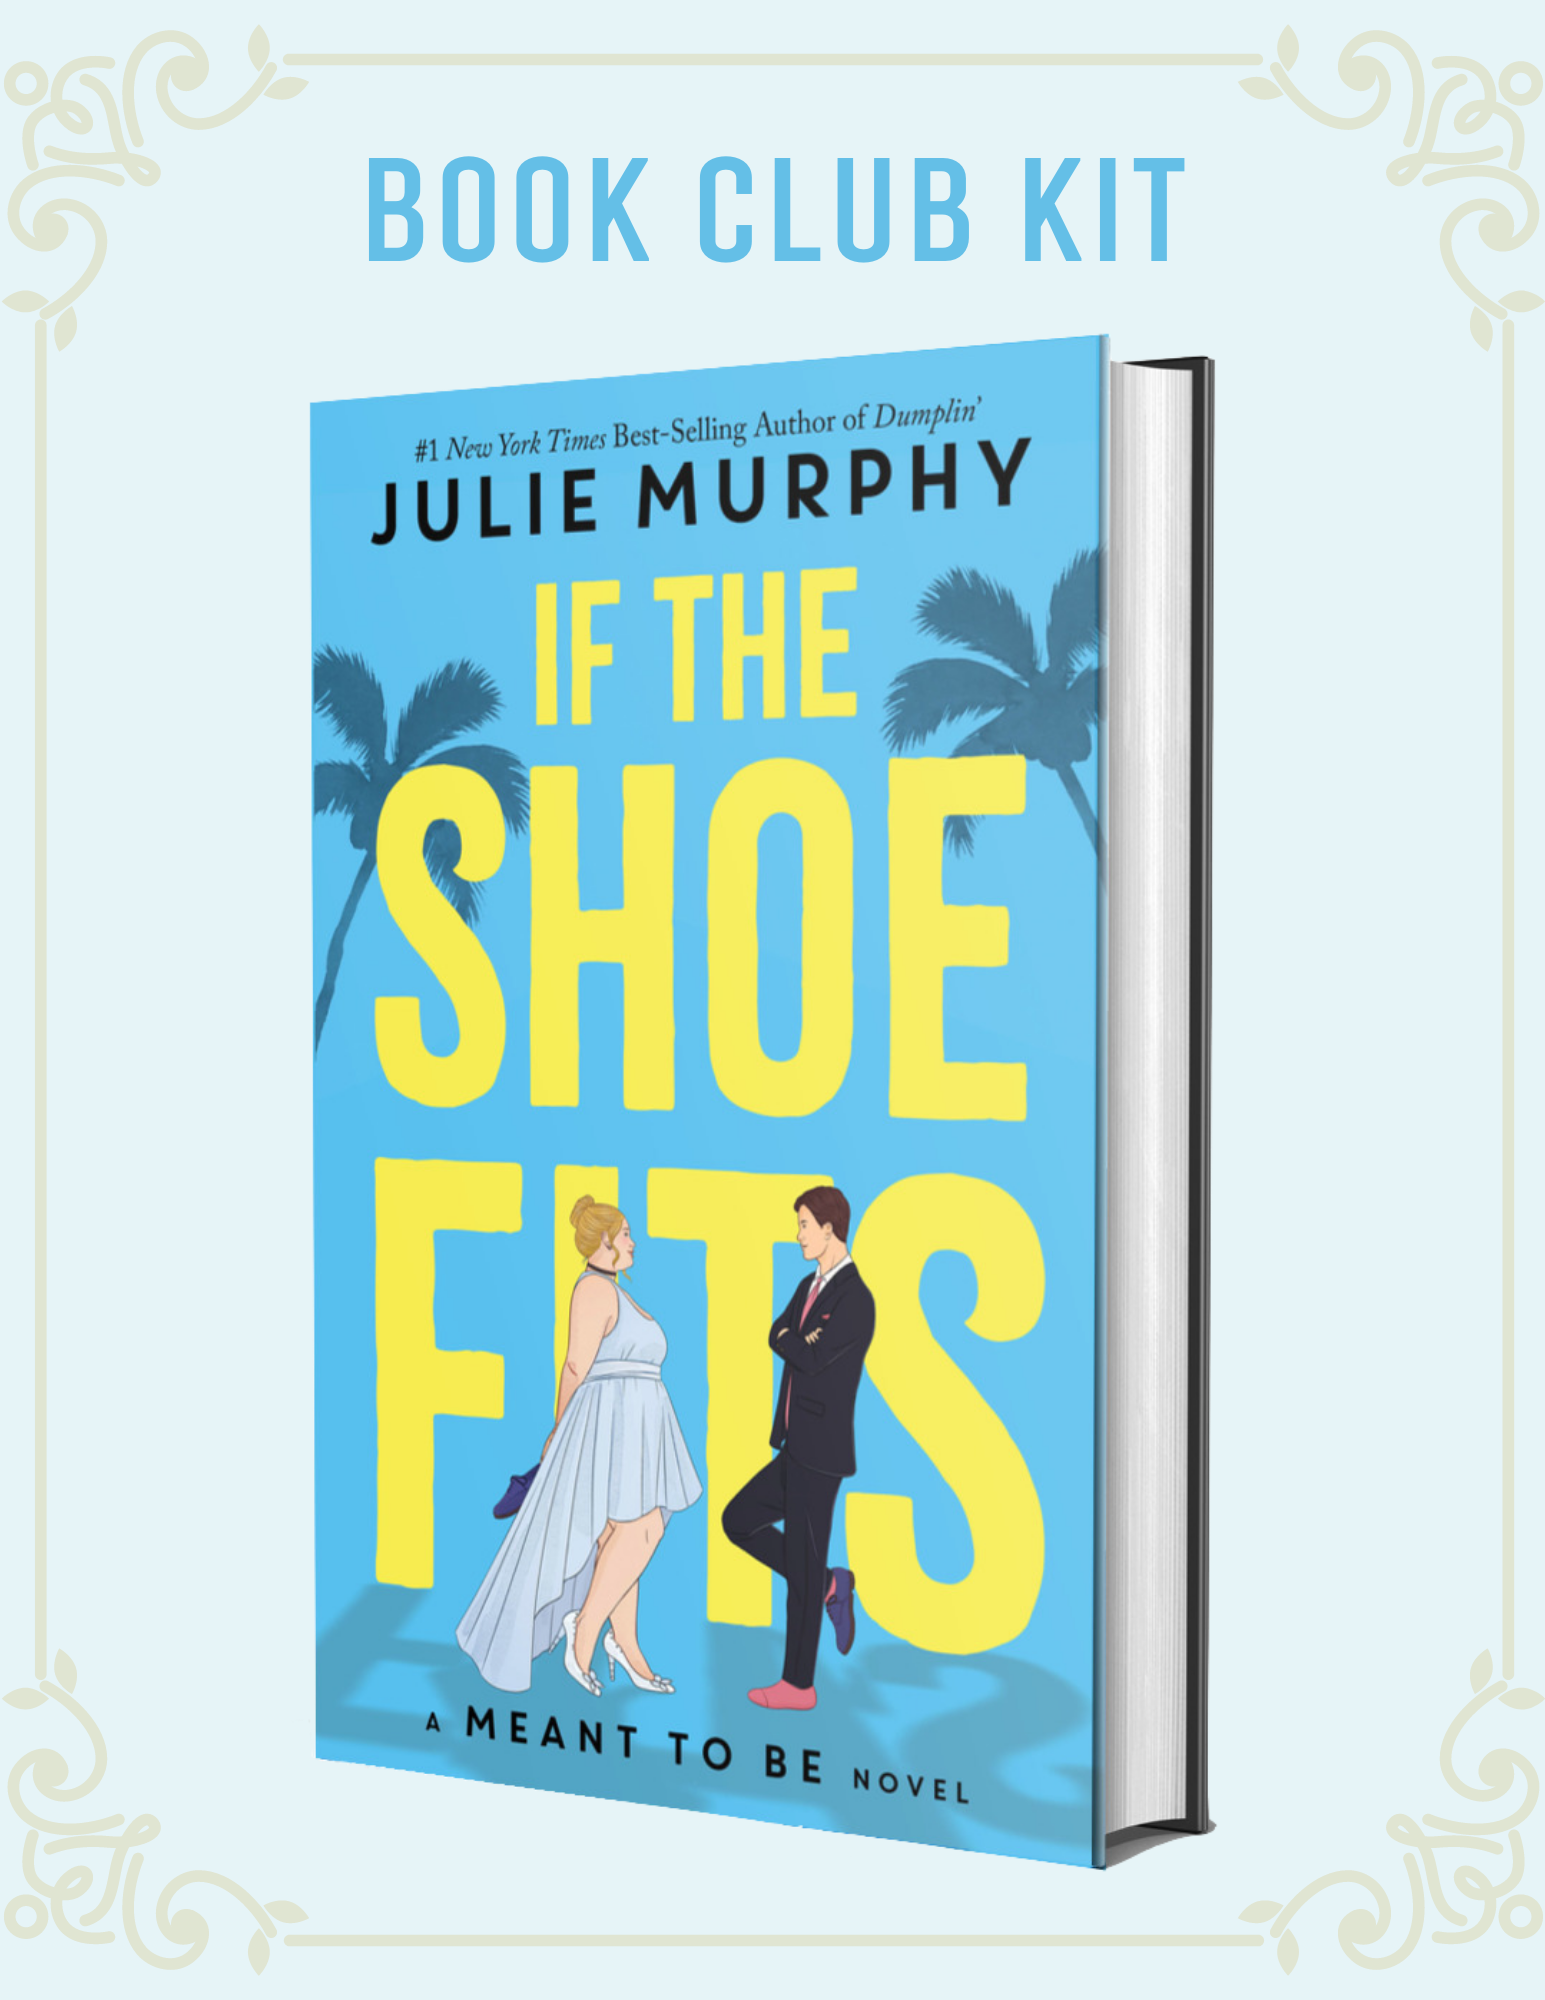 13 Entertaining Book Club Ideas for Your Next Book – Tip Junkie